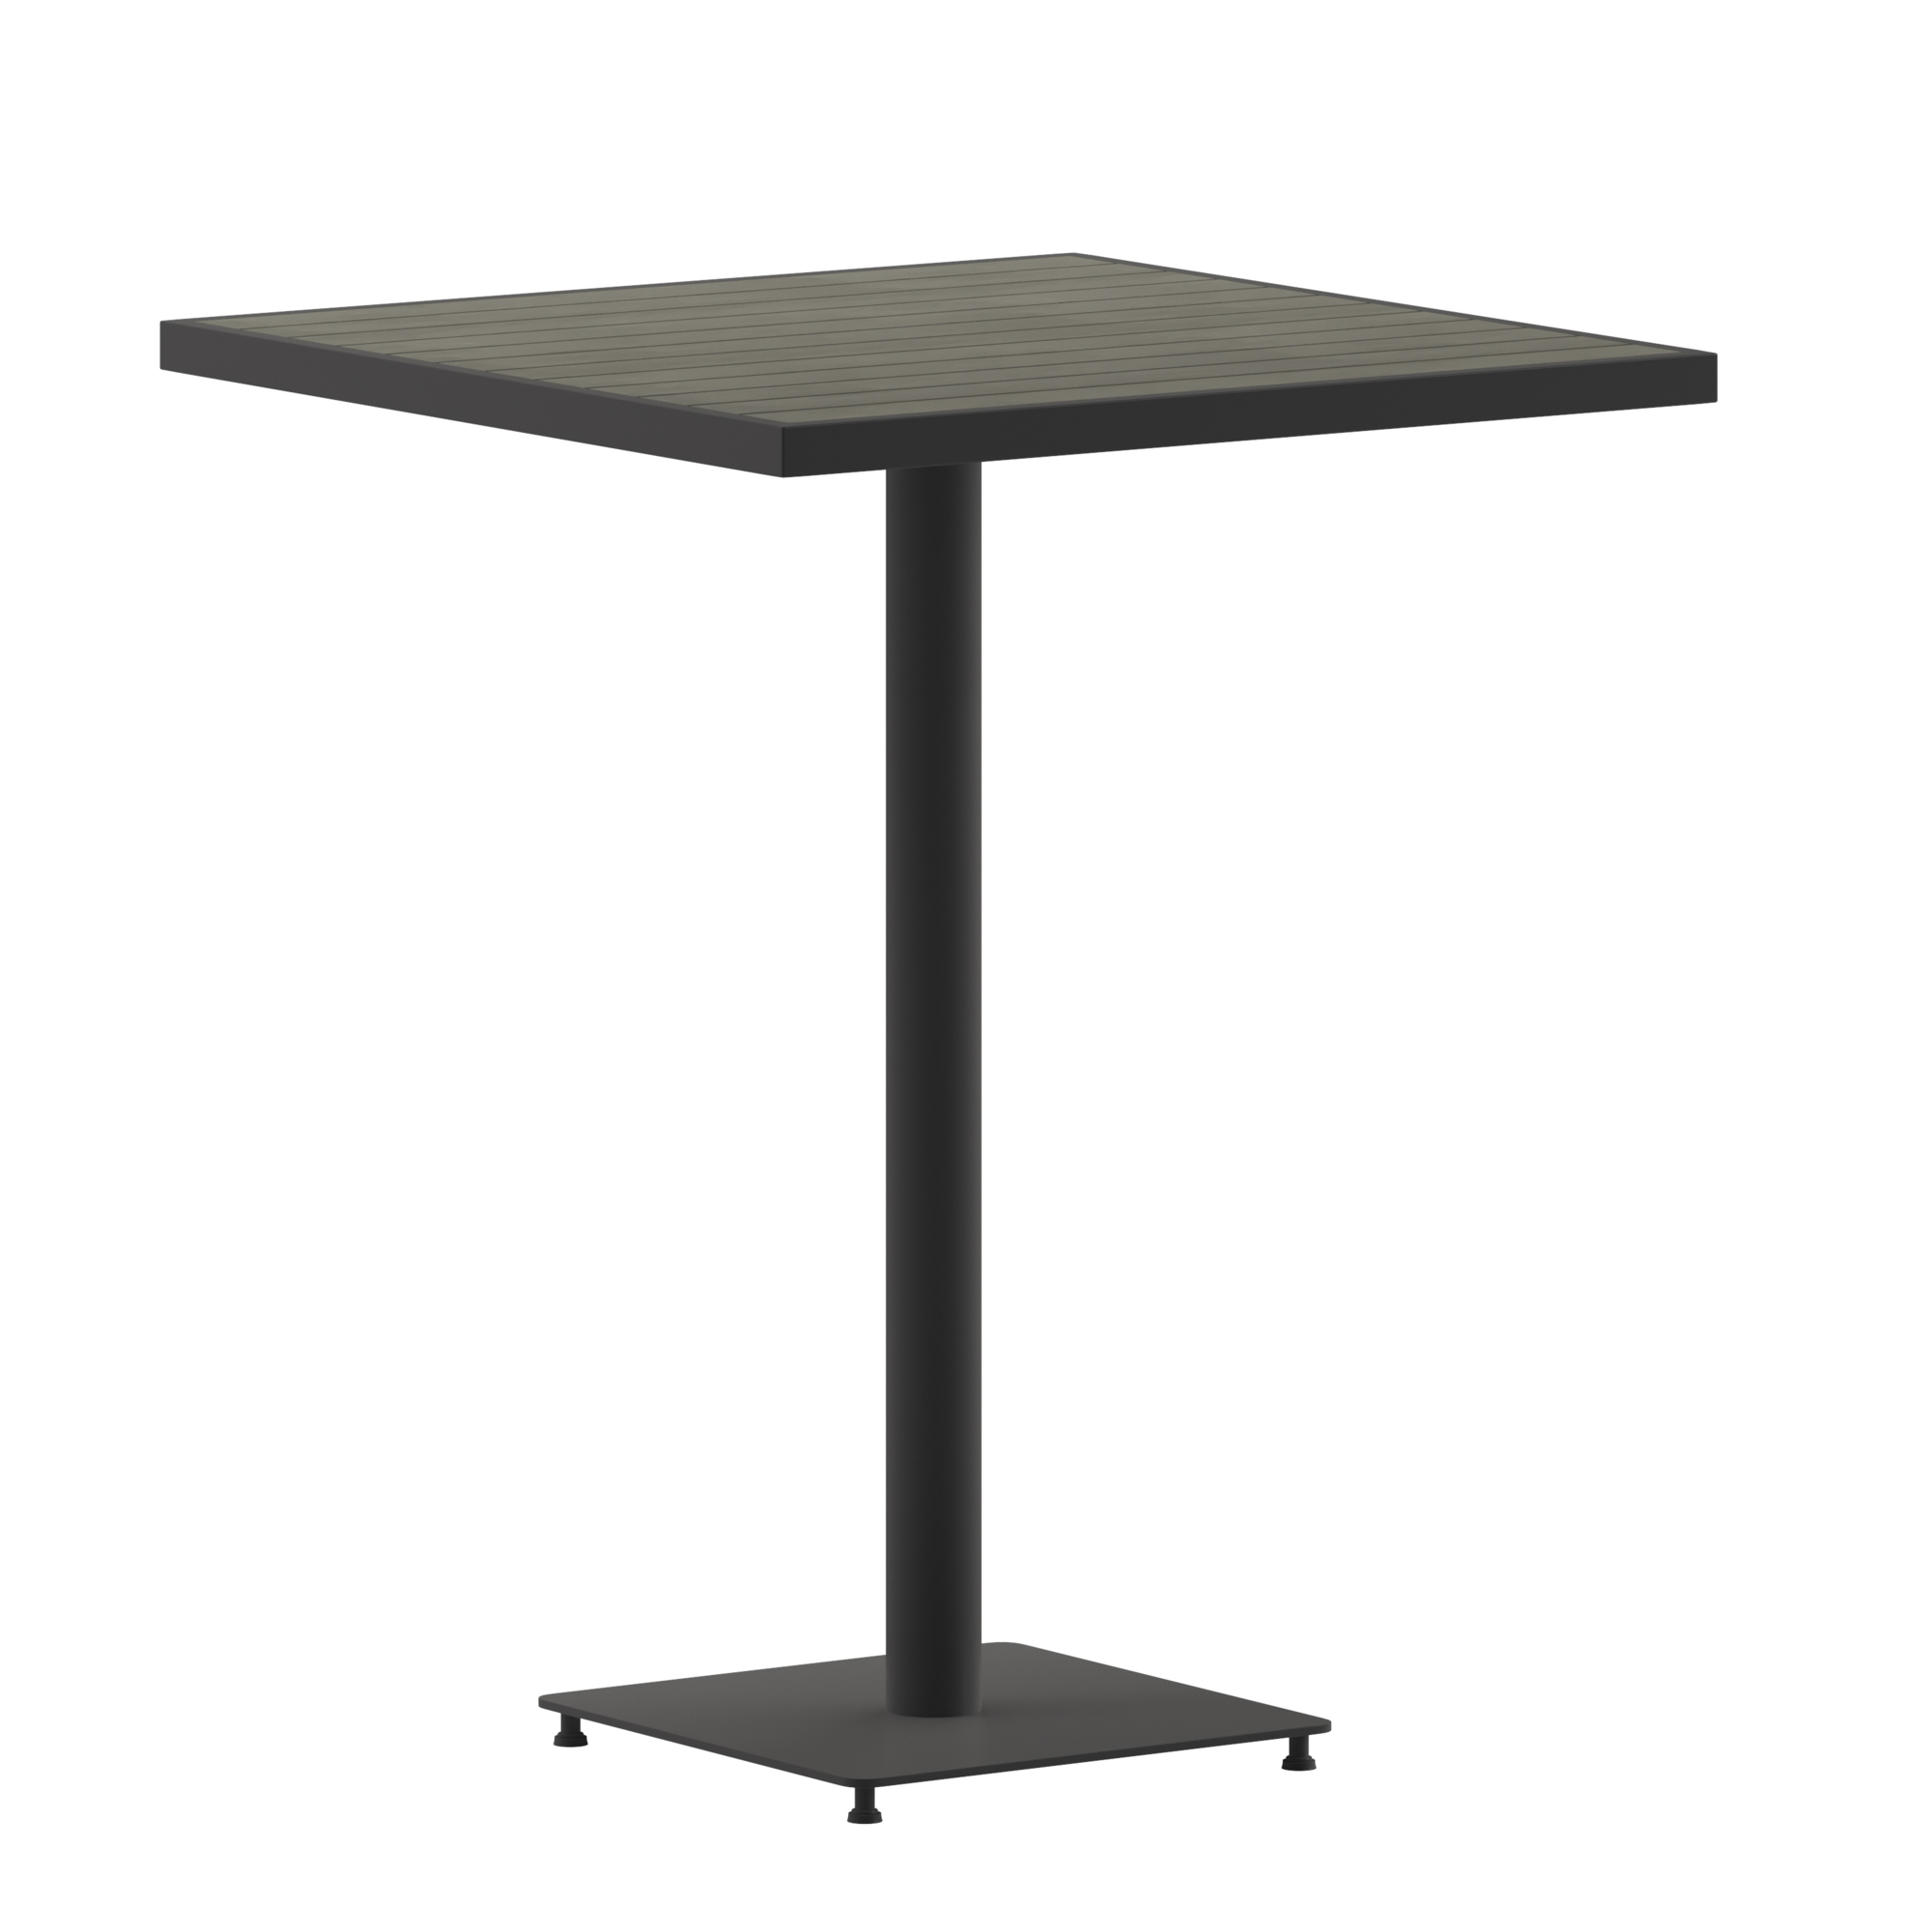 Flash Furniture, 32Inch Square Gray Wash Bar Height Poly Slat Table, Table Shape Square, Primary Color Gray, Height 40.5 in, Model XUHW10453232GY